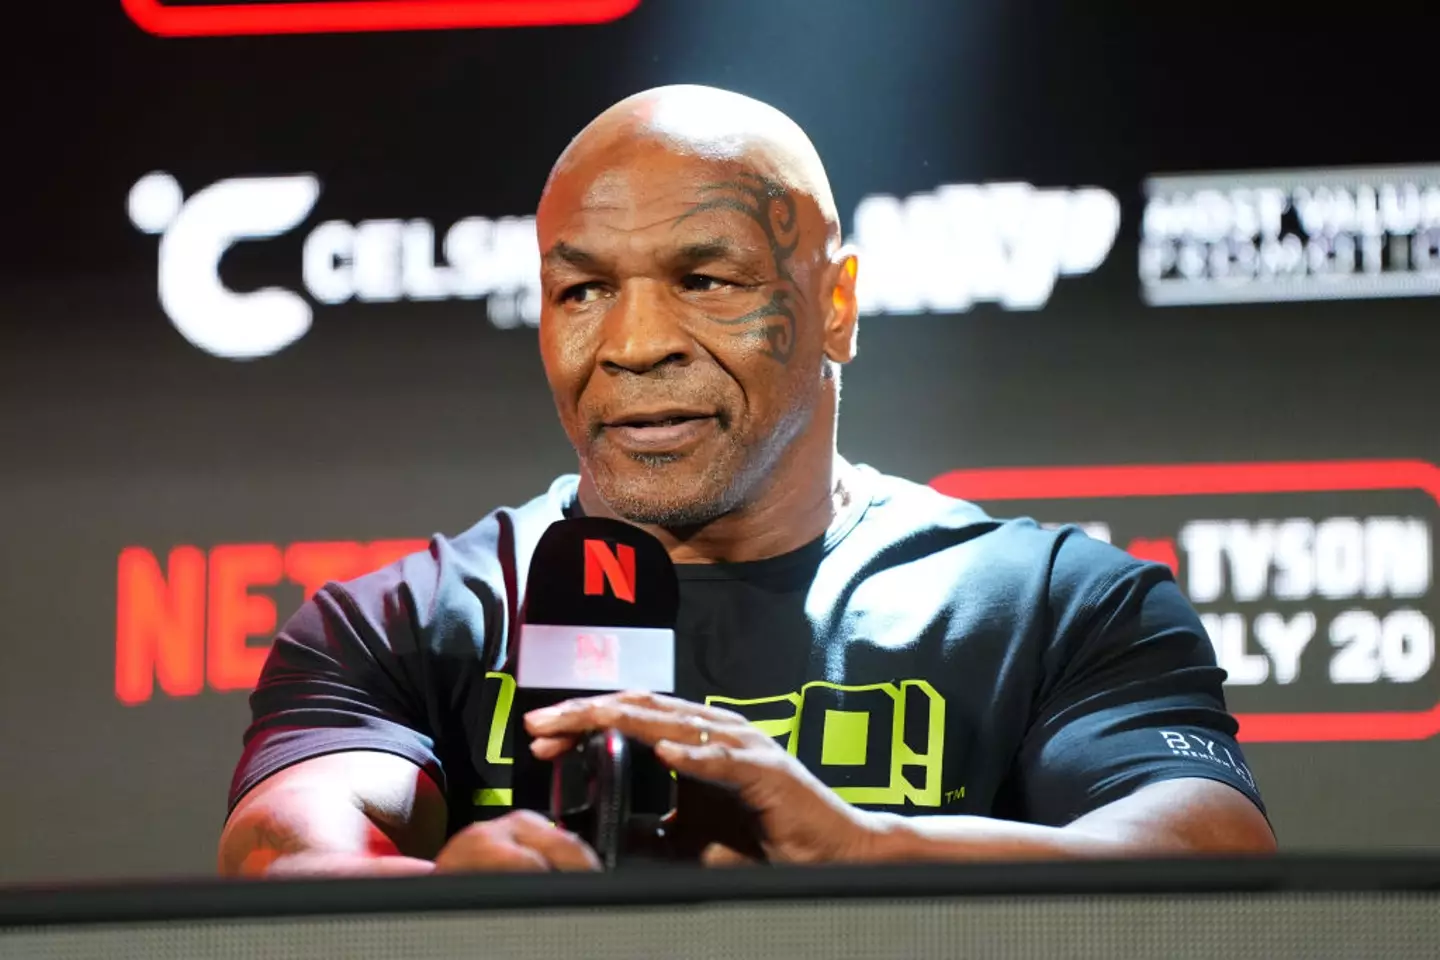 Mike Tyson has spoken out after his health scare at the weekend (Sarah Stier/Getty Images for Netflix)